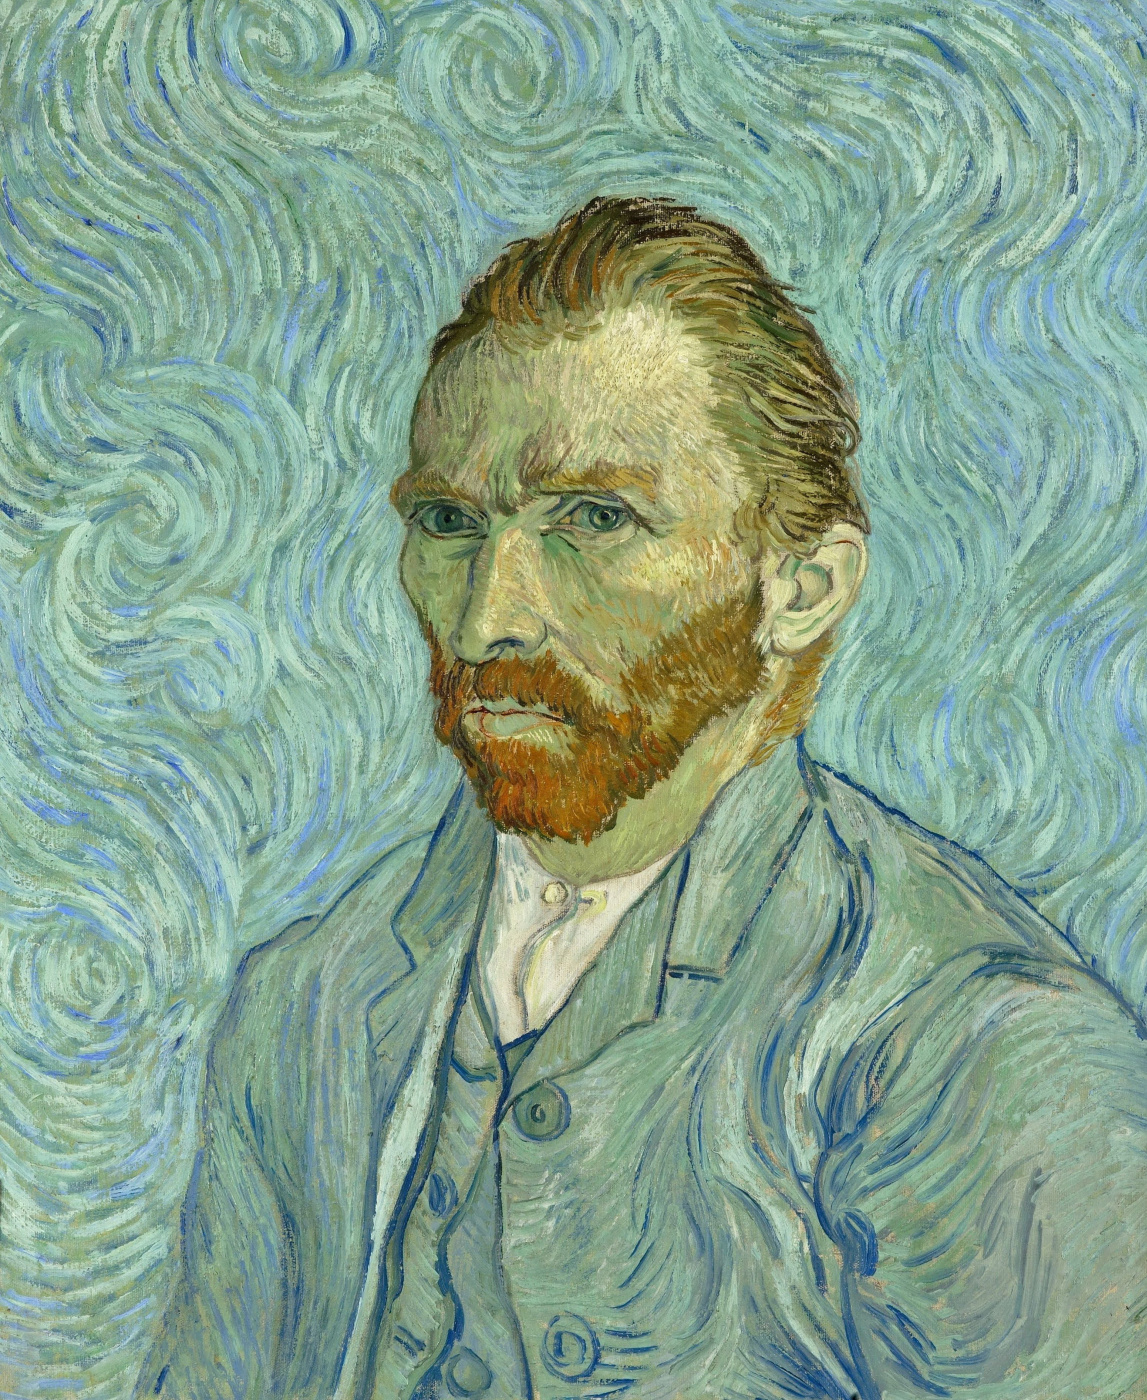 Portrait in shades: 7 stories about life and death of Vincent van Gogh